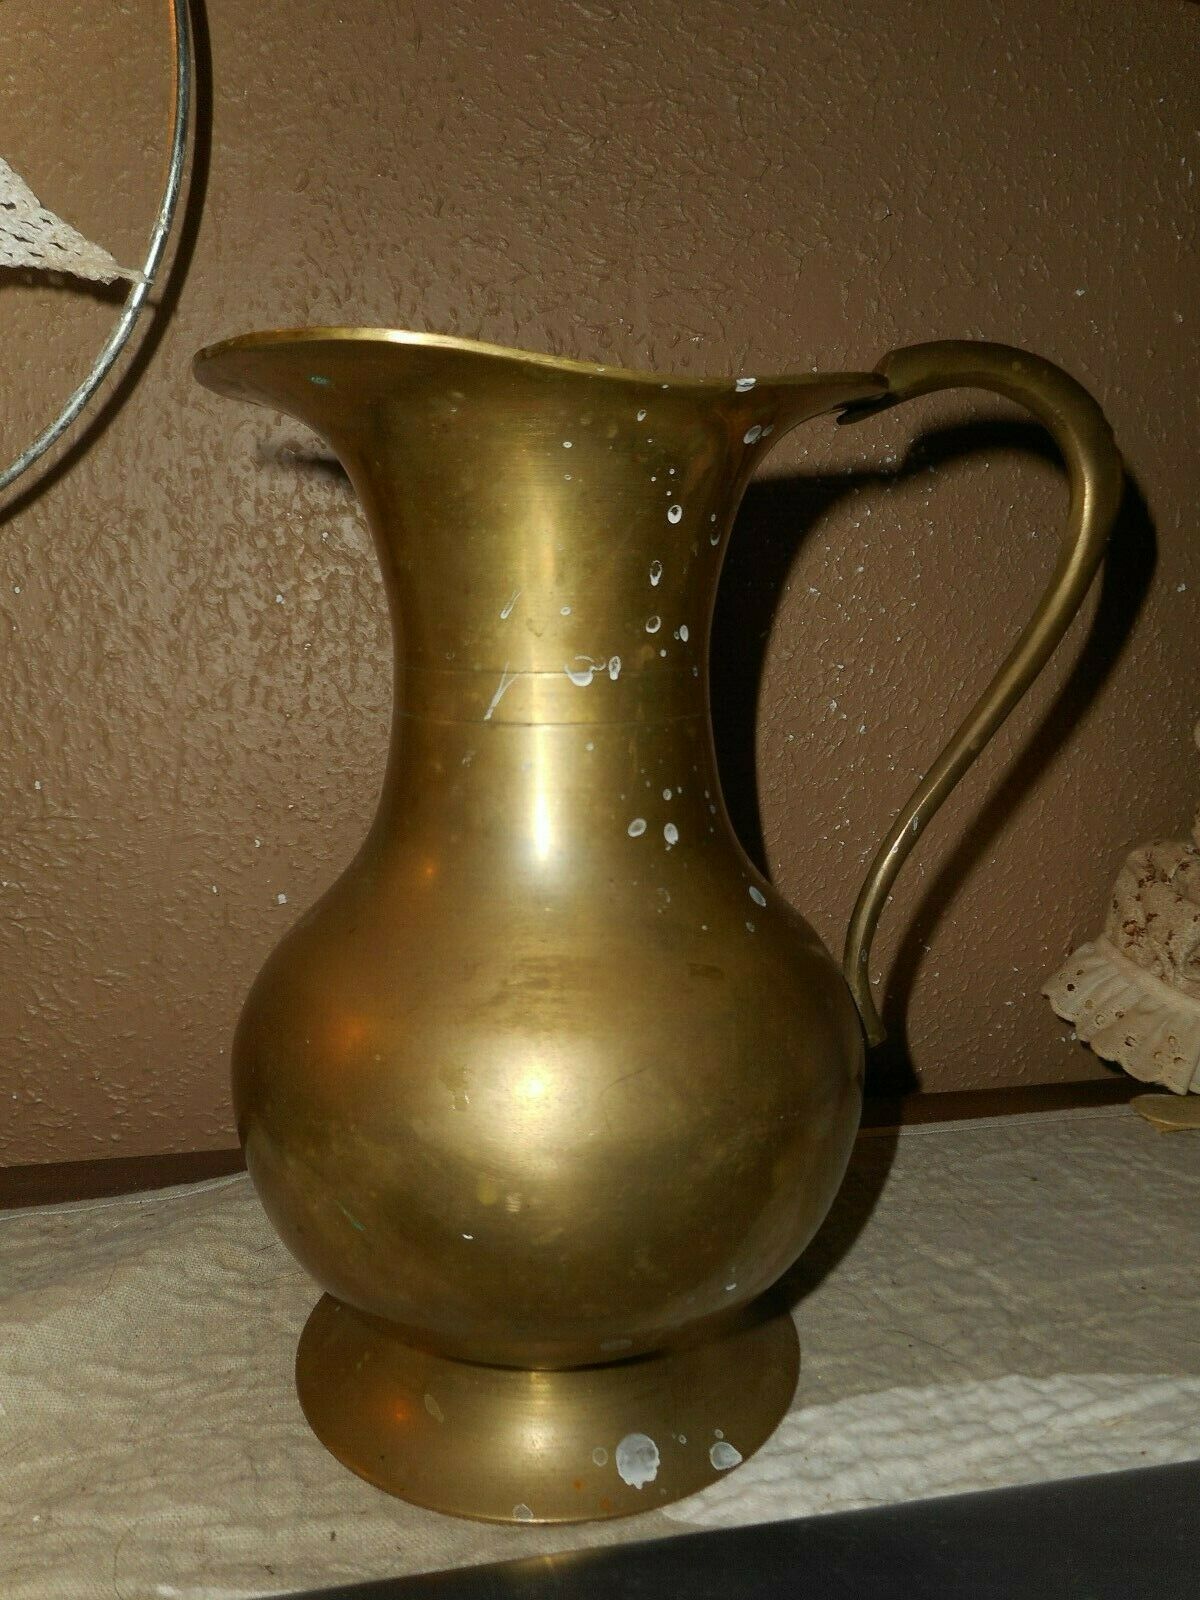 Small but heavy pitcher Vintage solid brass handmade can jug